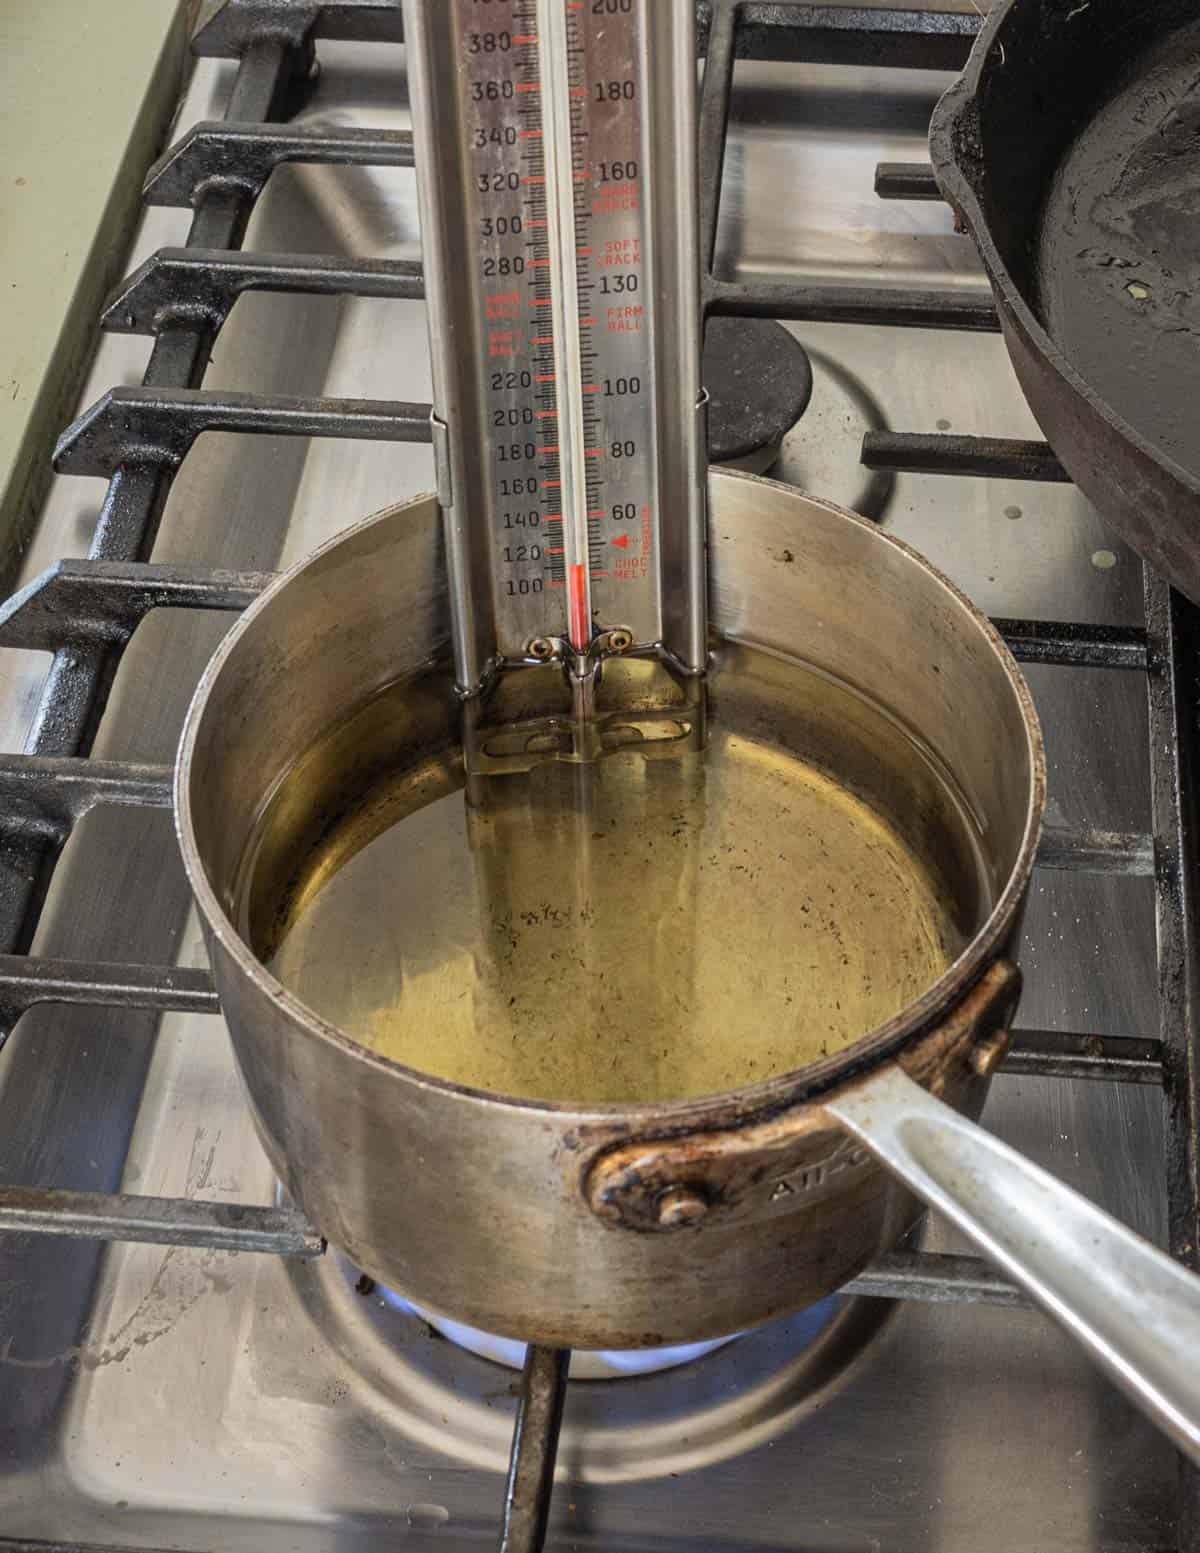 Heating oil for frying with a candy thermometer. 